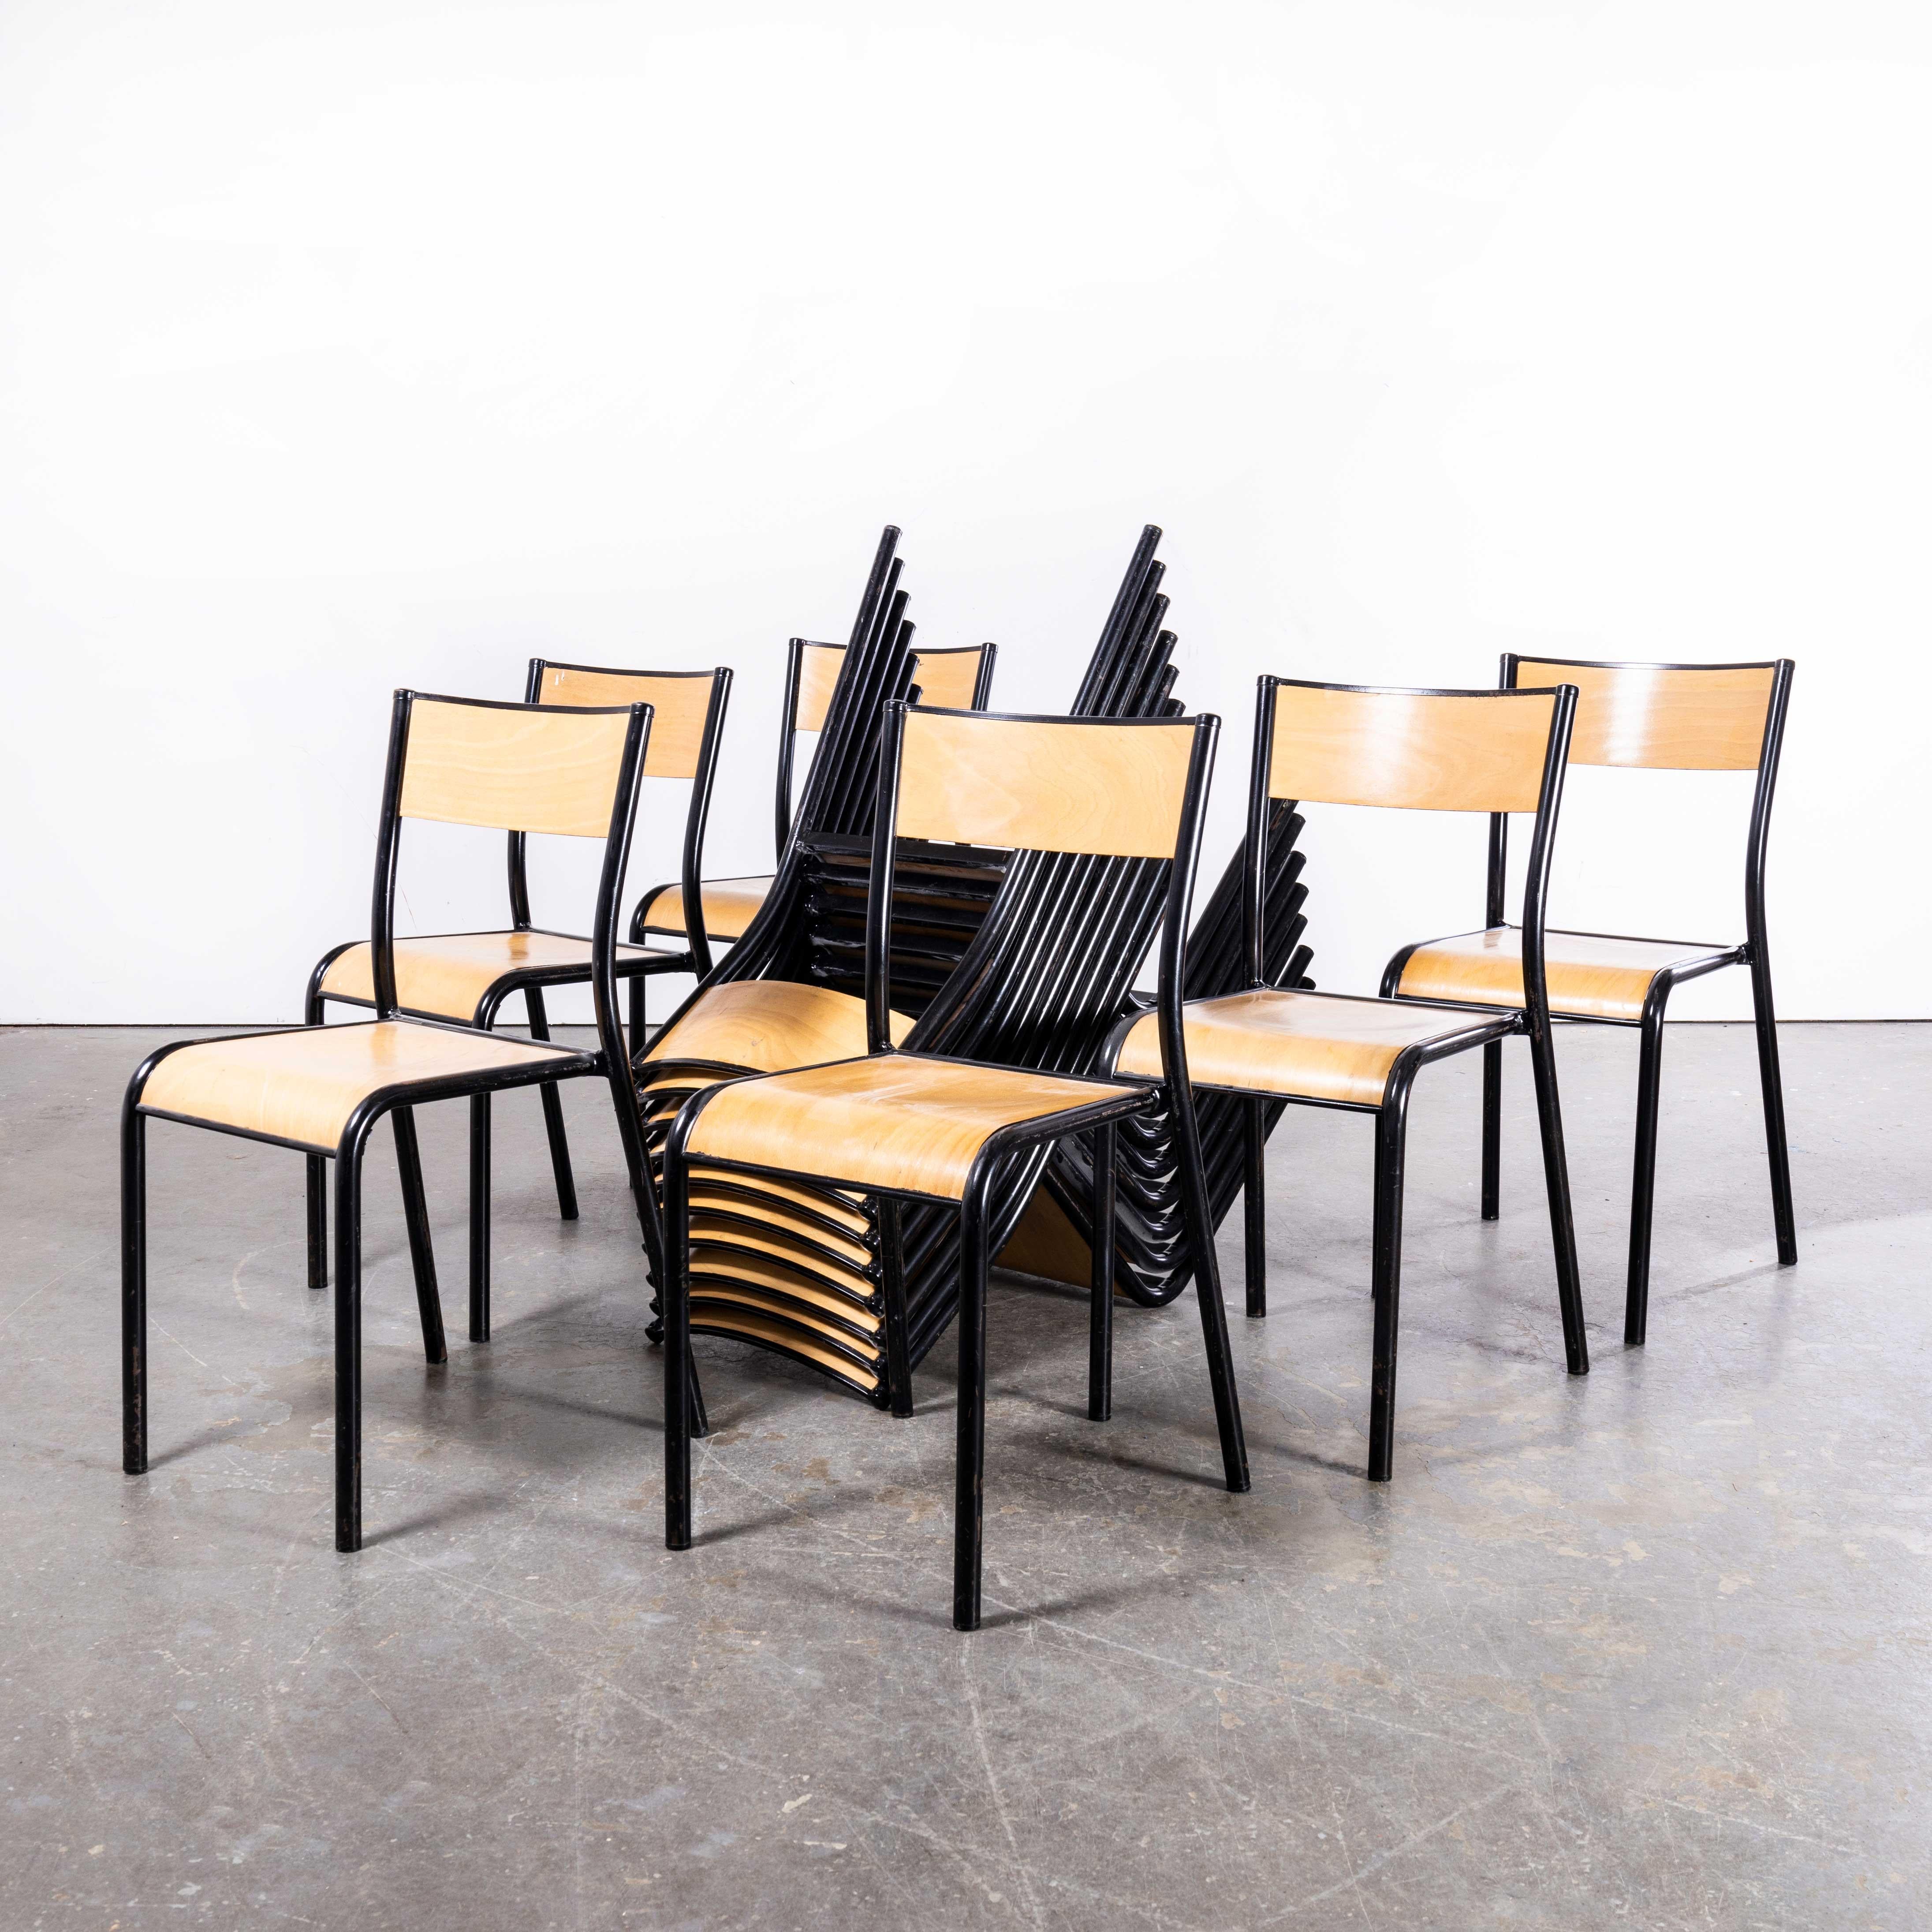 1950s French Mullca Stacking School – Dining Chairs – Black Model 510 – Various Quantities Available
1950s French Mullca Stacking School – Dining Chairs – Black Model 510 – Various Quantities Available. One of our most favourite chairs, in 1947